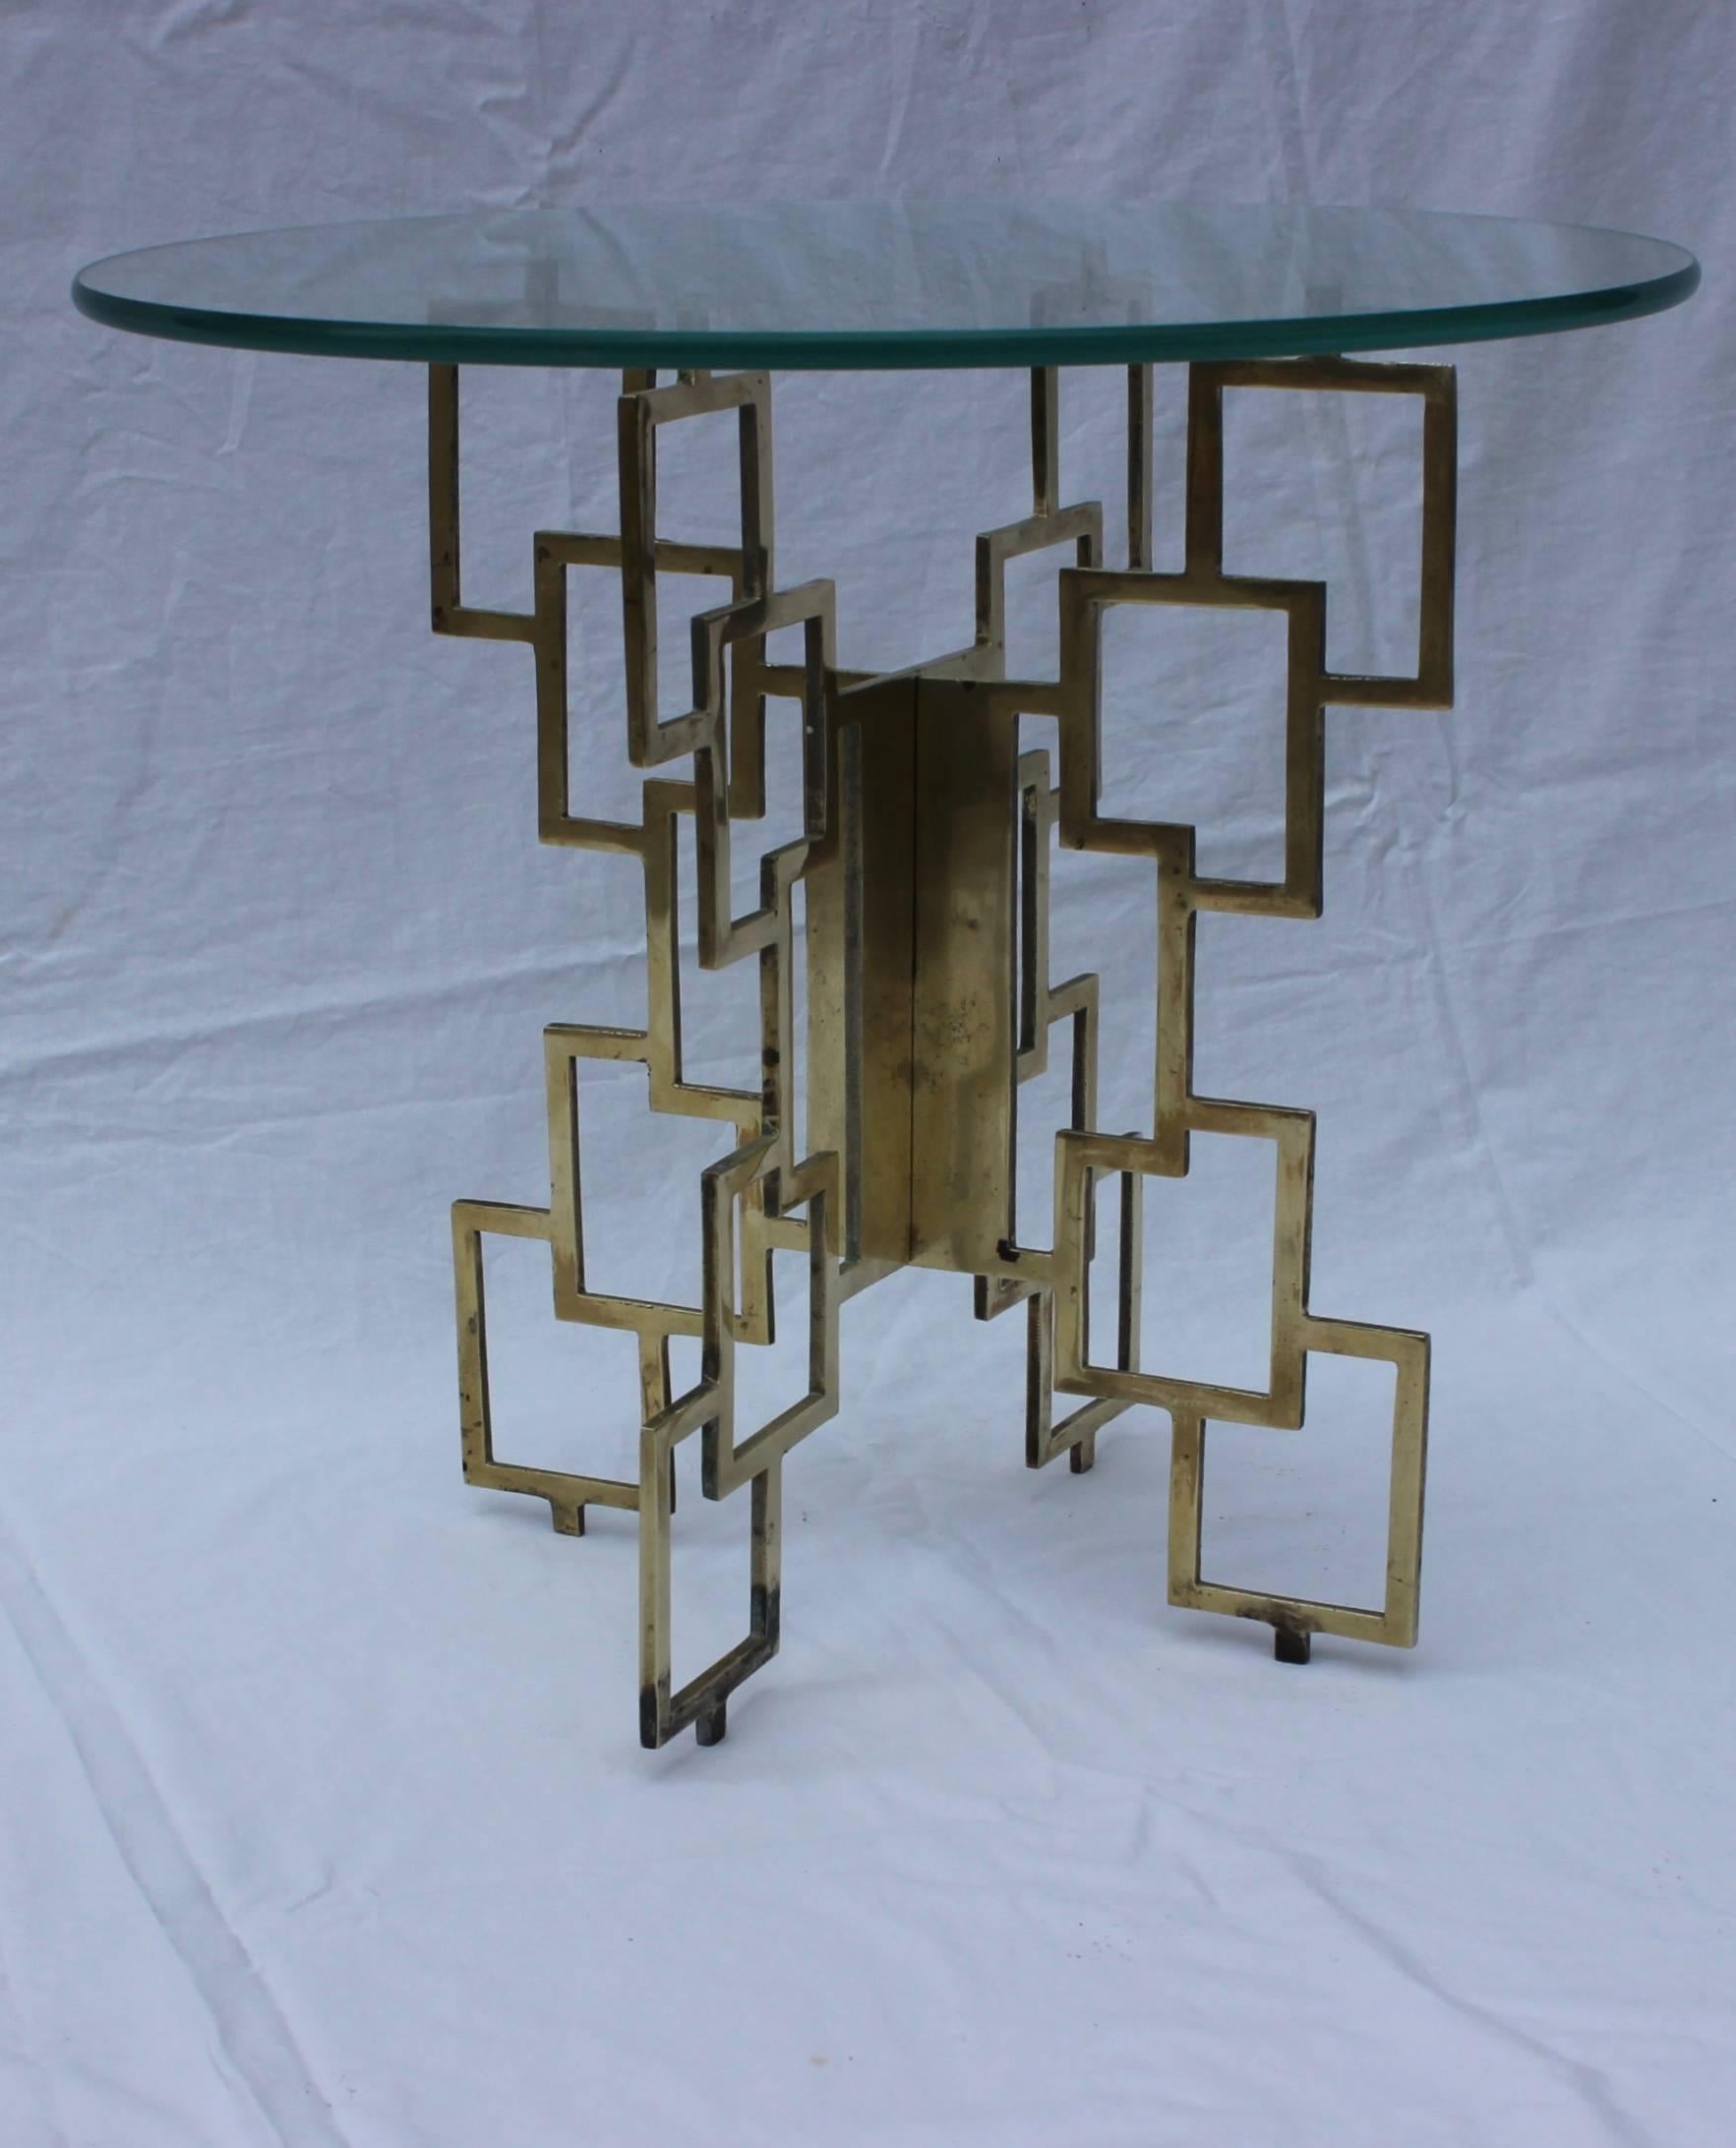 Stunning 1970s modern interlocking brass base side table with glass top.